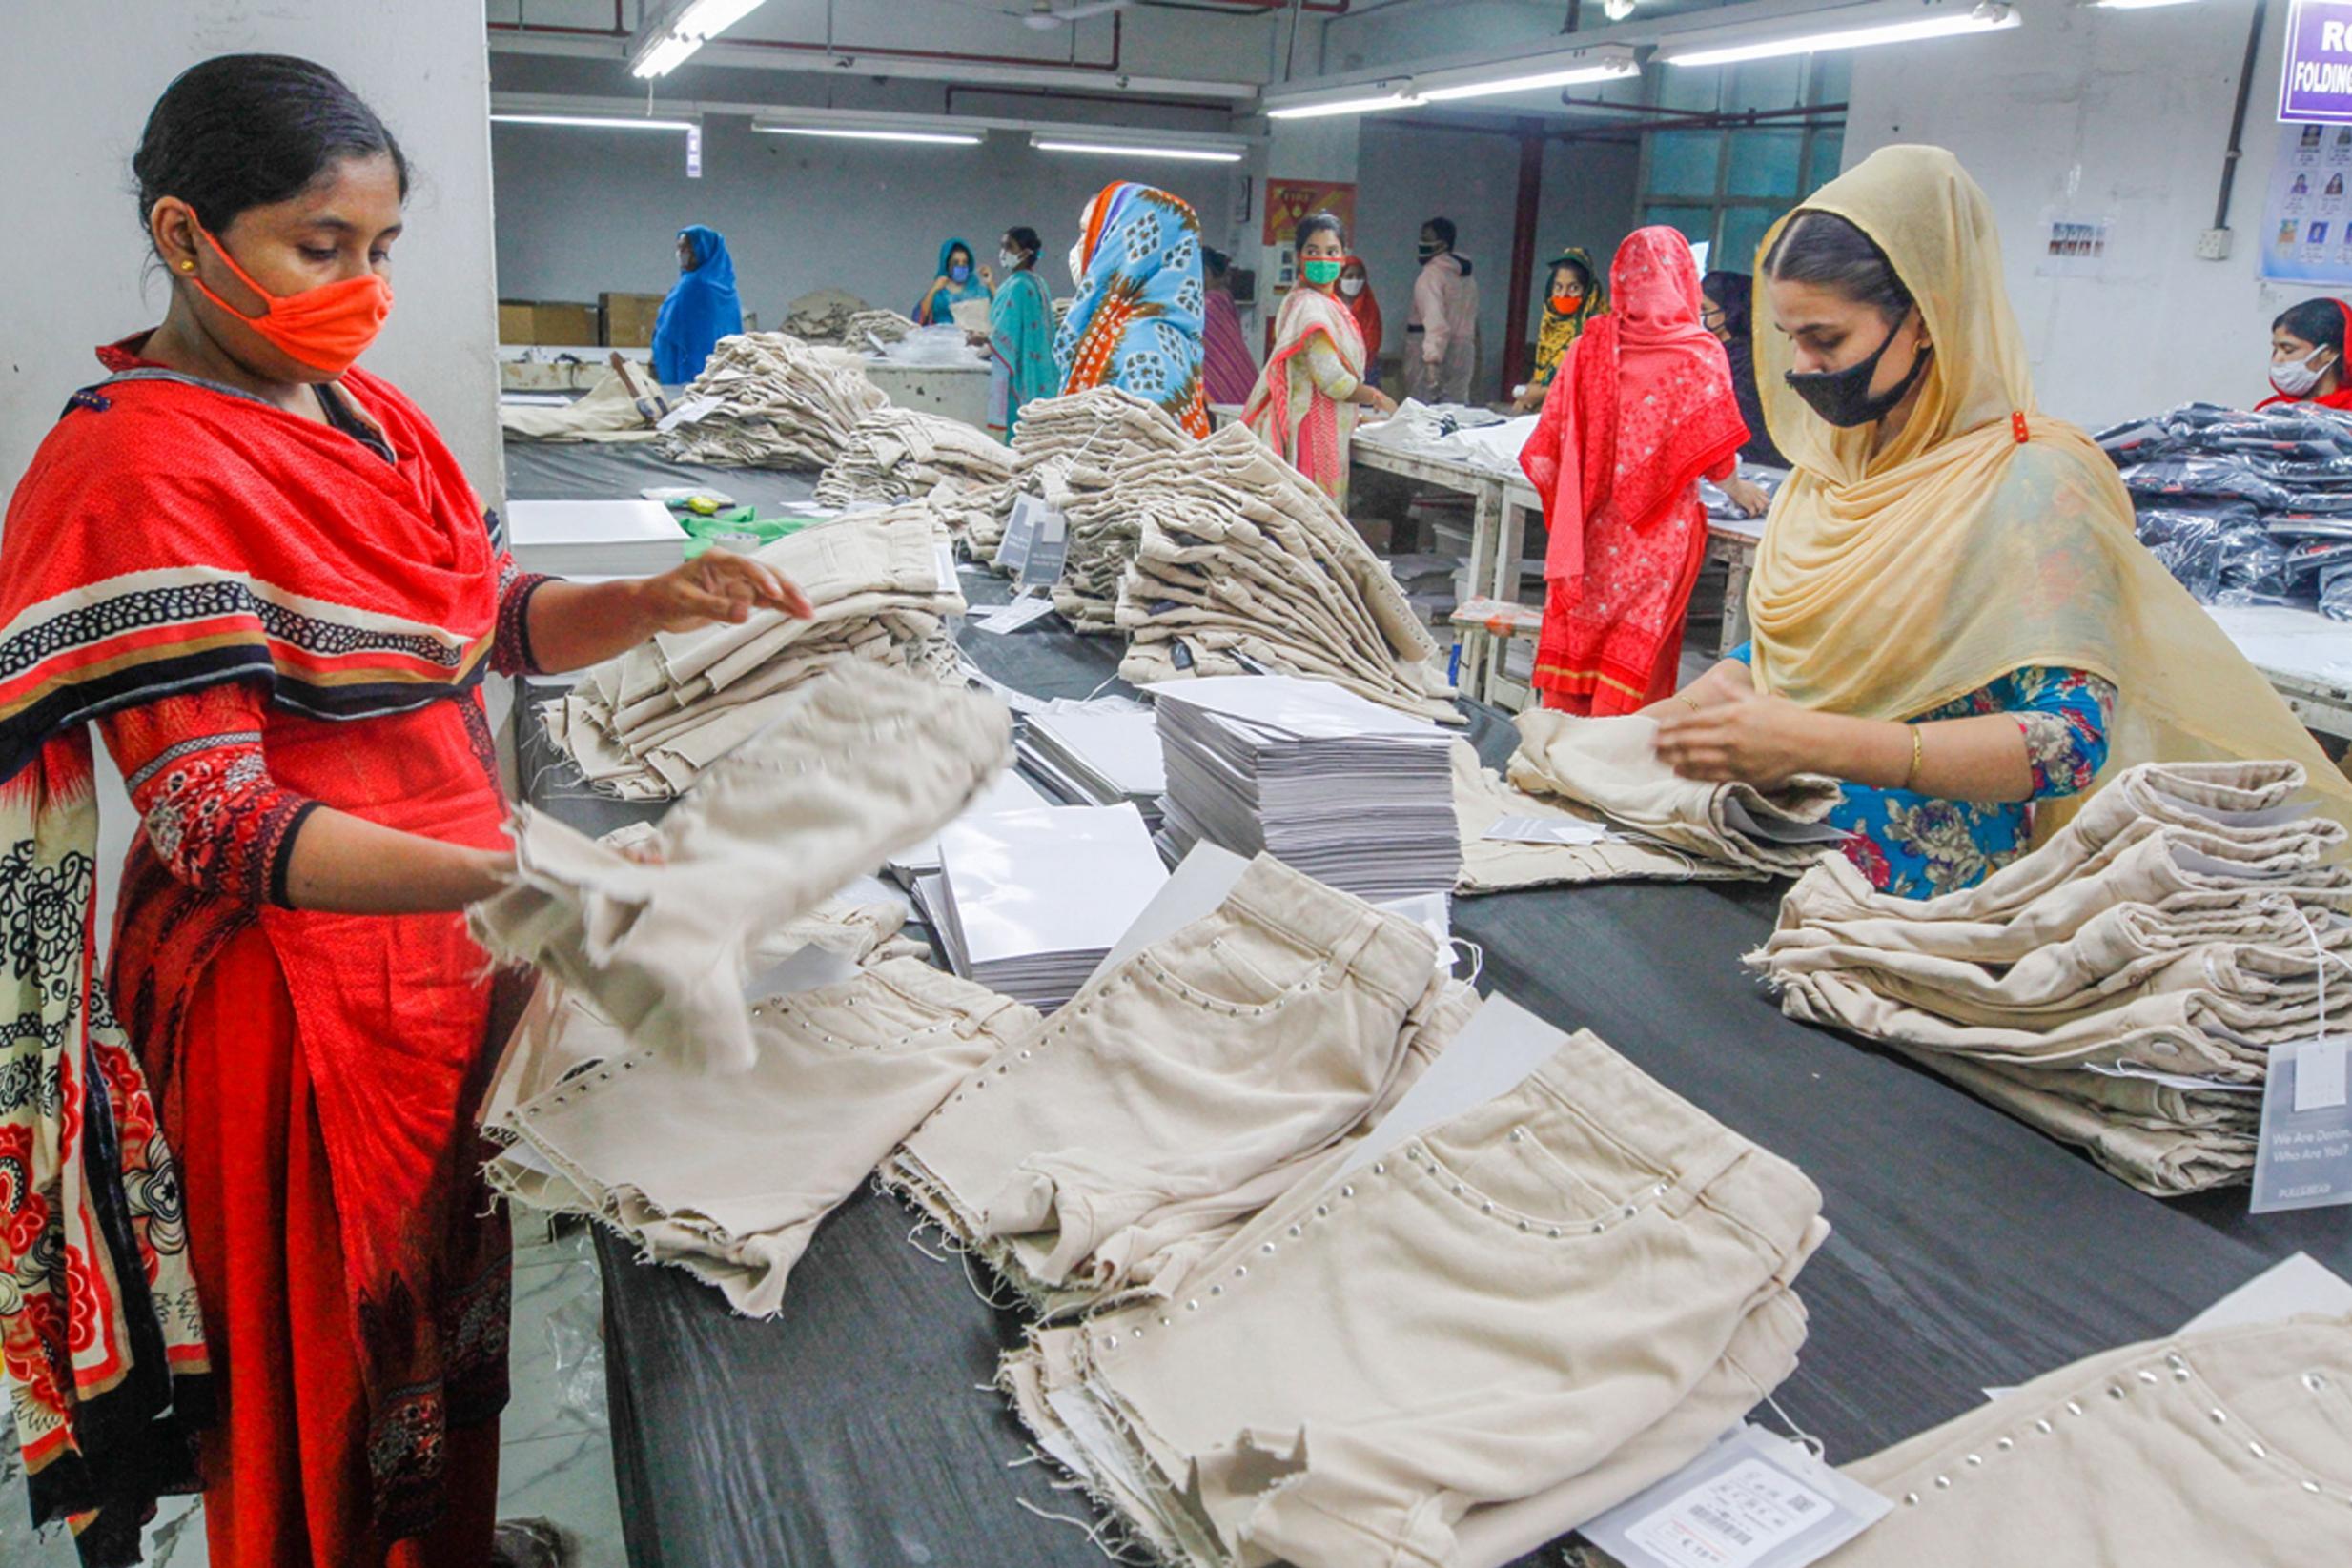 Workers make garments that will be delivered around the world